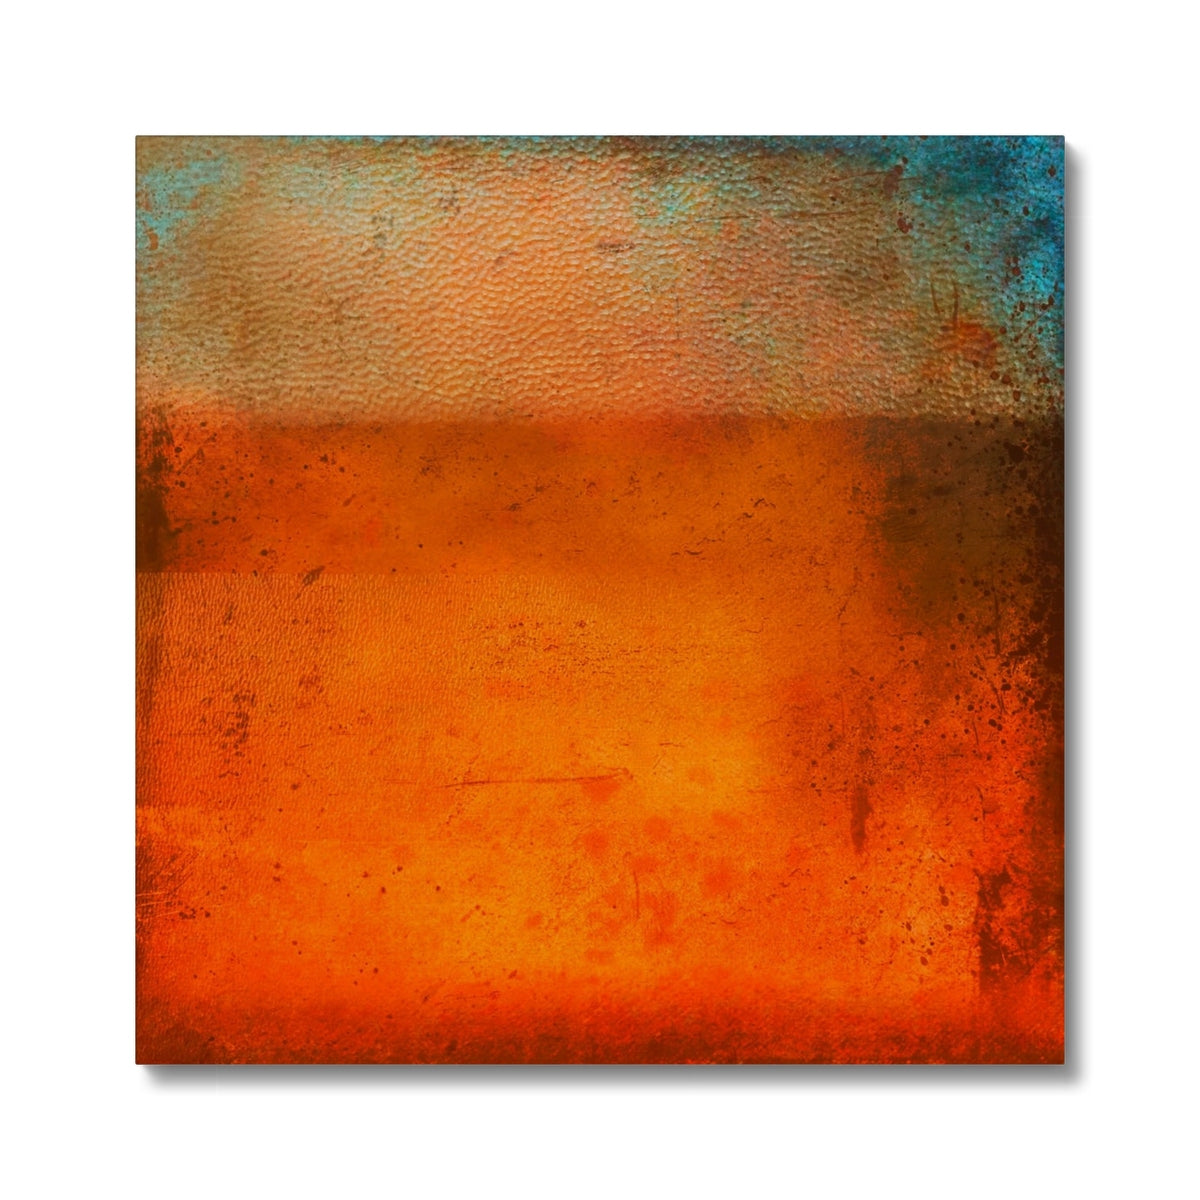 Sunset Horizon Abstract Painting | Canvas From Scotland-Contemporary Stretched Canvas Prints-Abstract & Impressionistic Art Gallery-24"x24"-Paintings, Prints, Homeware, Art Gifts From Scotland By Scottish Artist Kevin Hunter